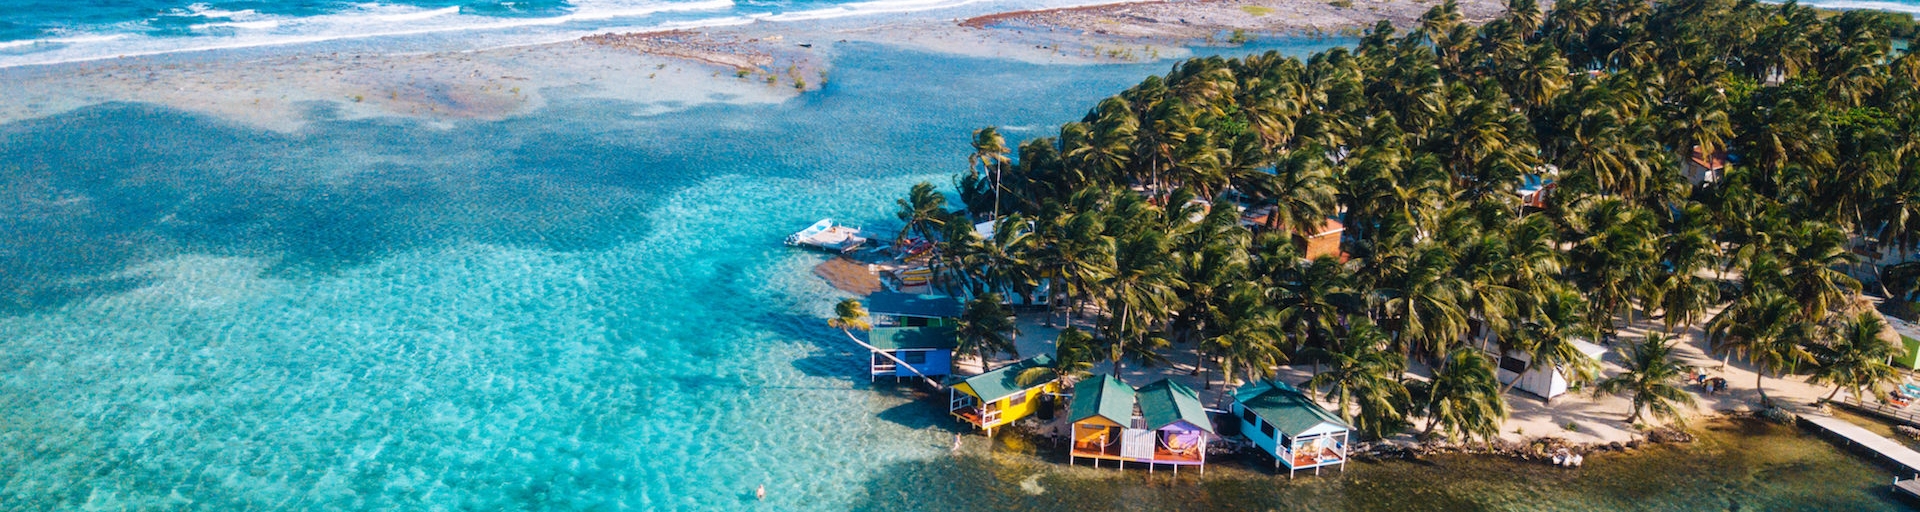 aerial view of tobaco caye paradise in belize